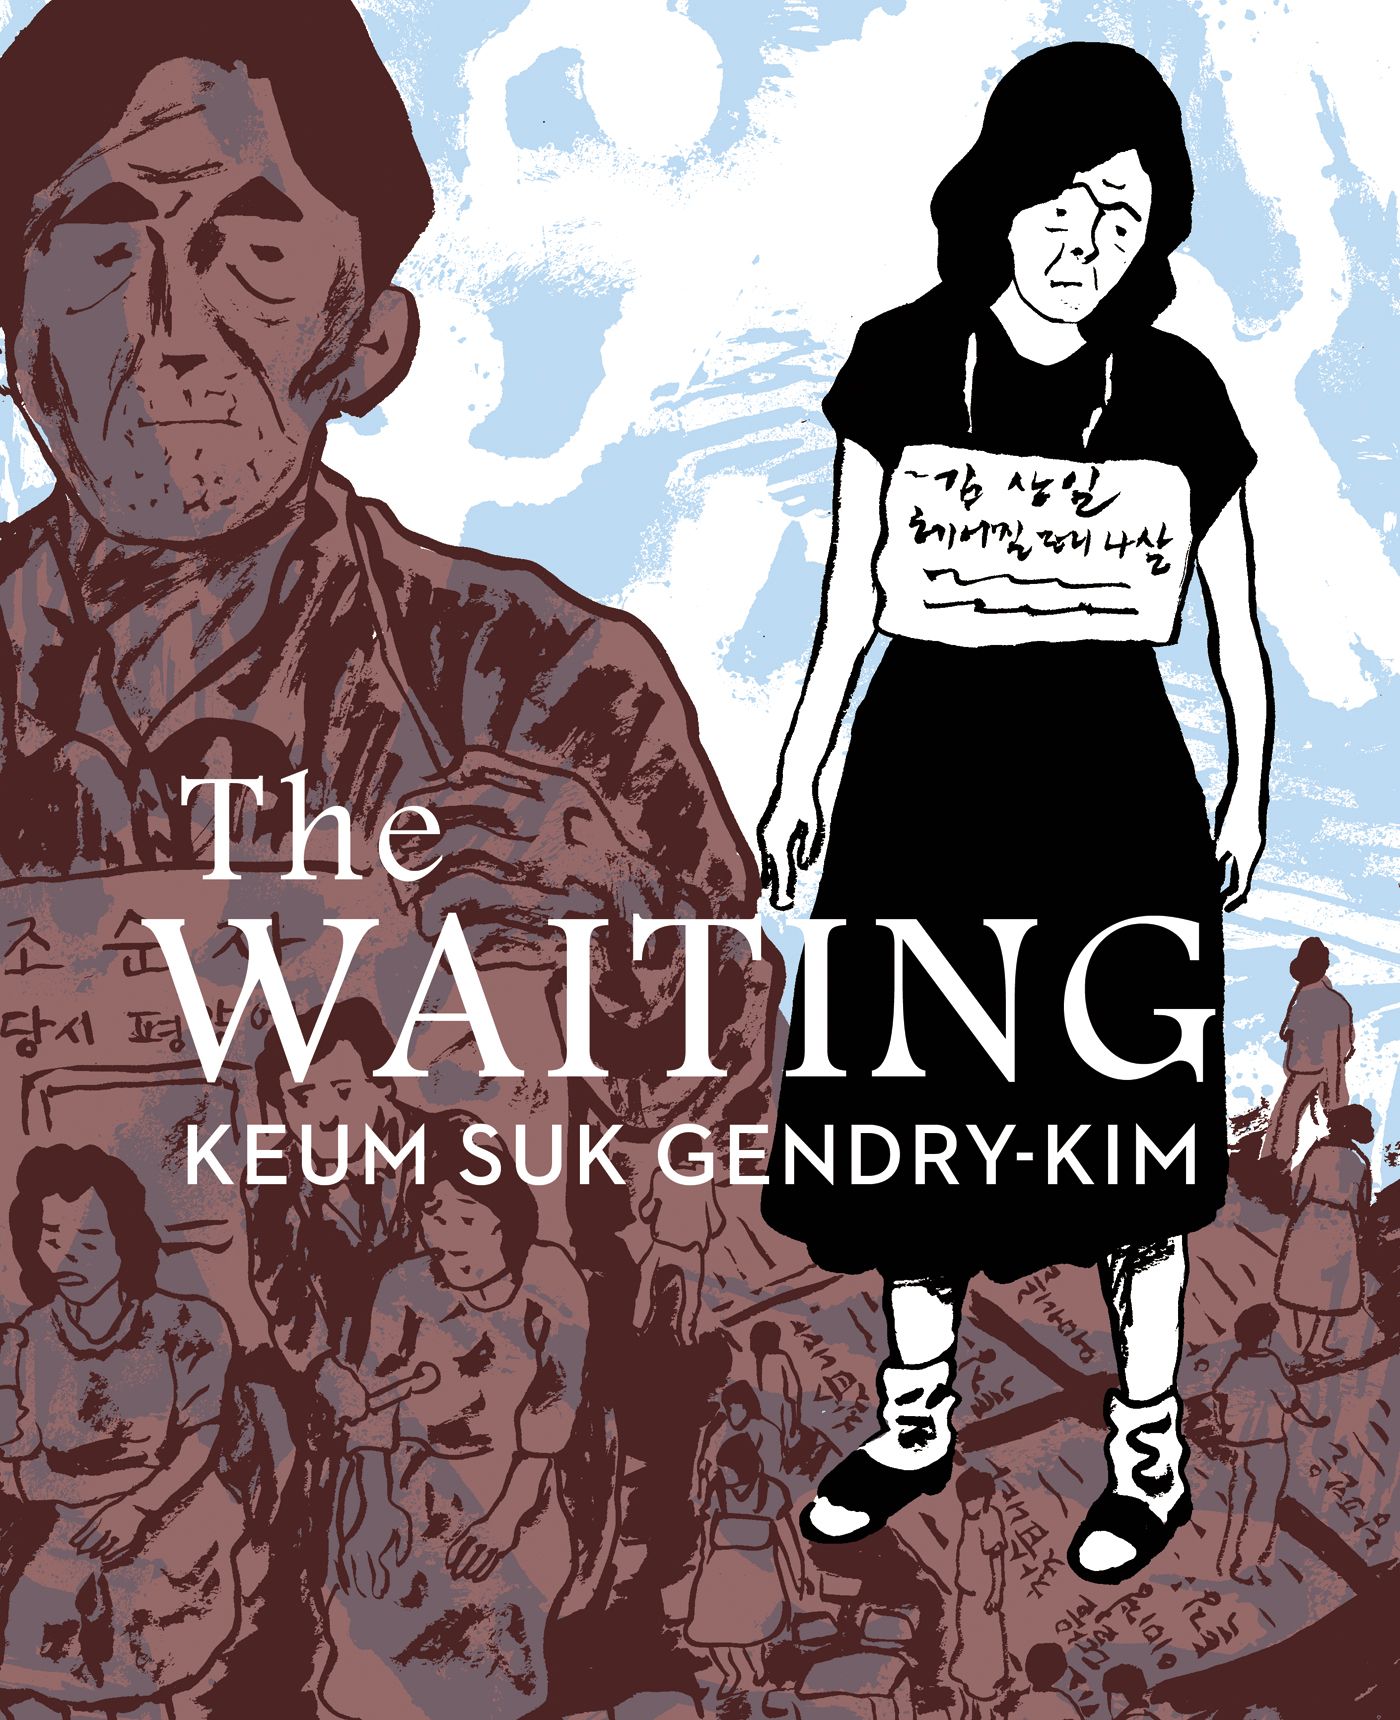 The Waiting by Keum Suk Gendry-Kim and translated by Janet Hong